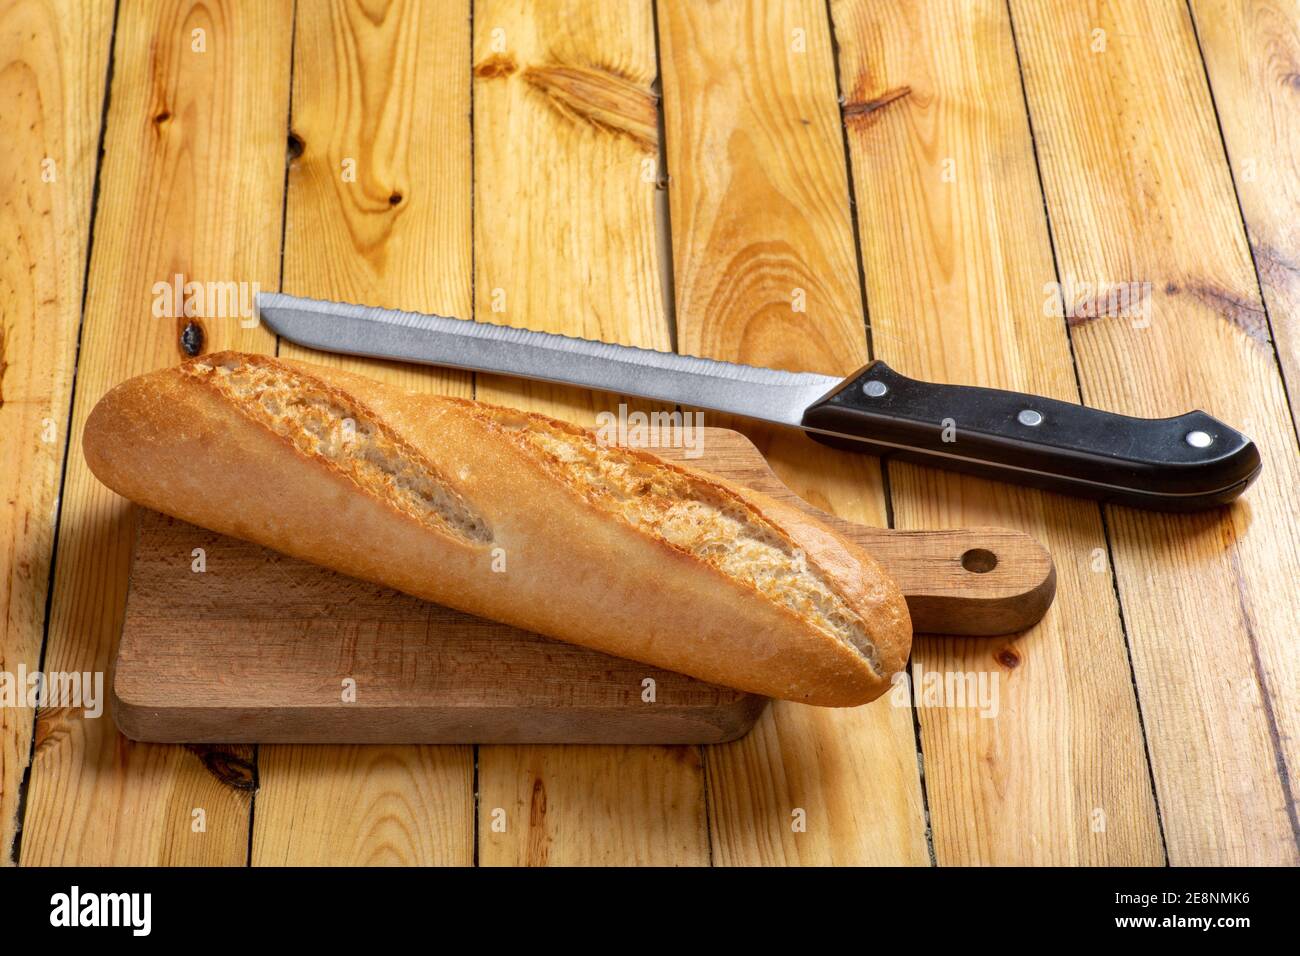 Tasty and fresh baguette on the kitchen table. Bread and a chopping knife in the home kitchen. Light background. Stock Photo